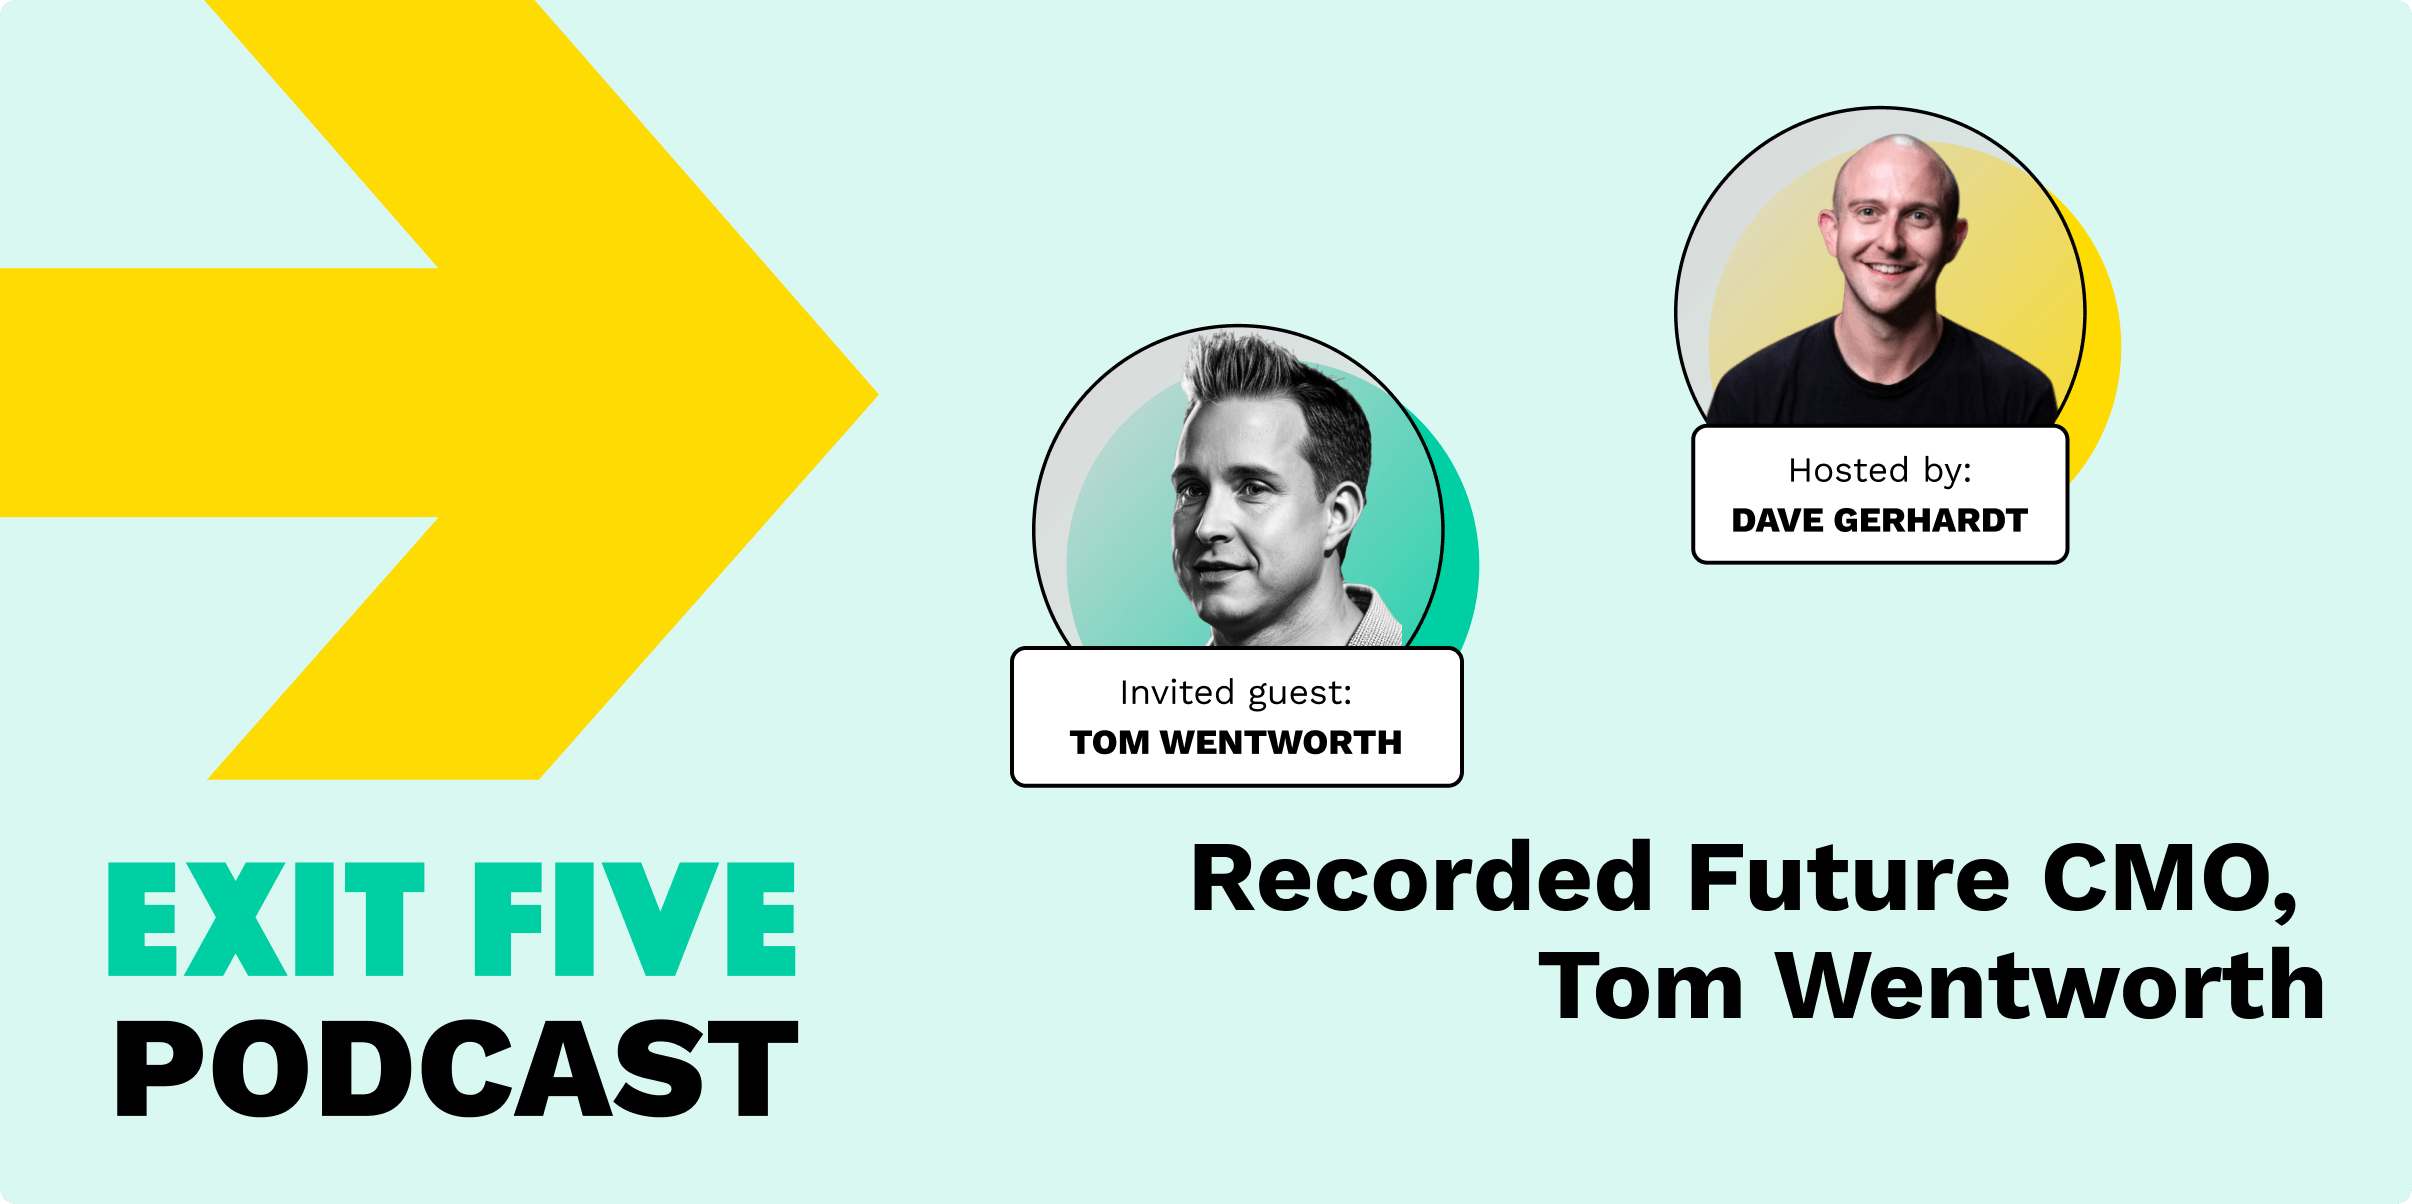 Recorded Future CMO Tom Wentworth